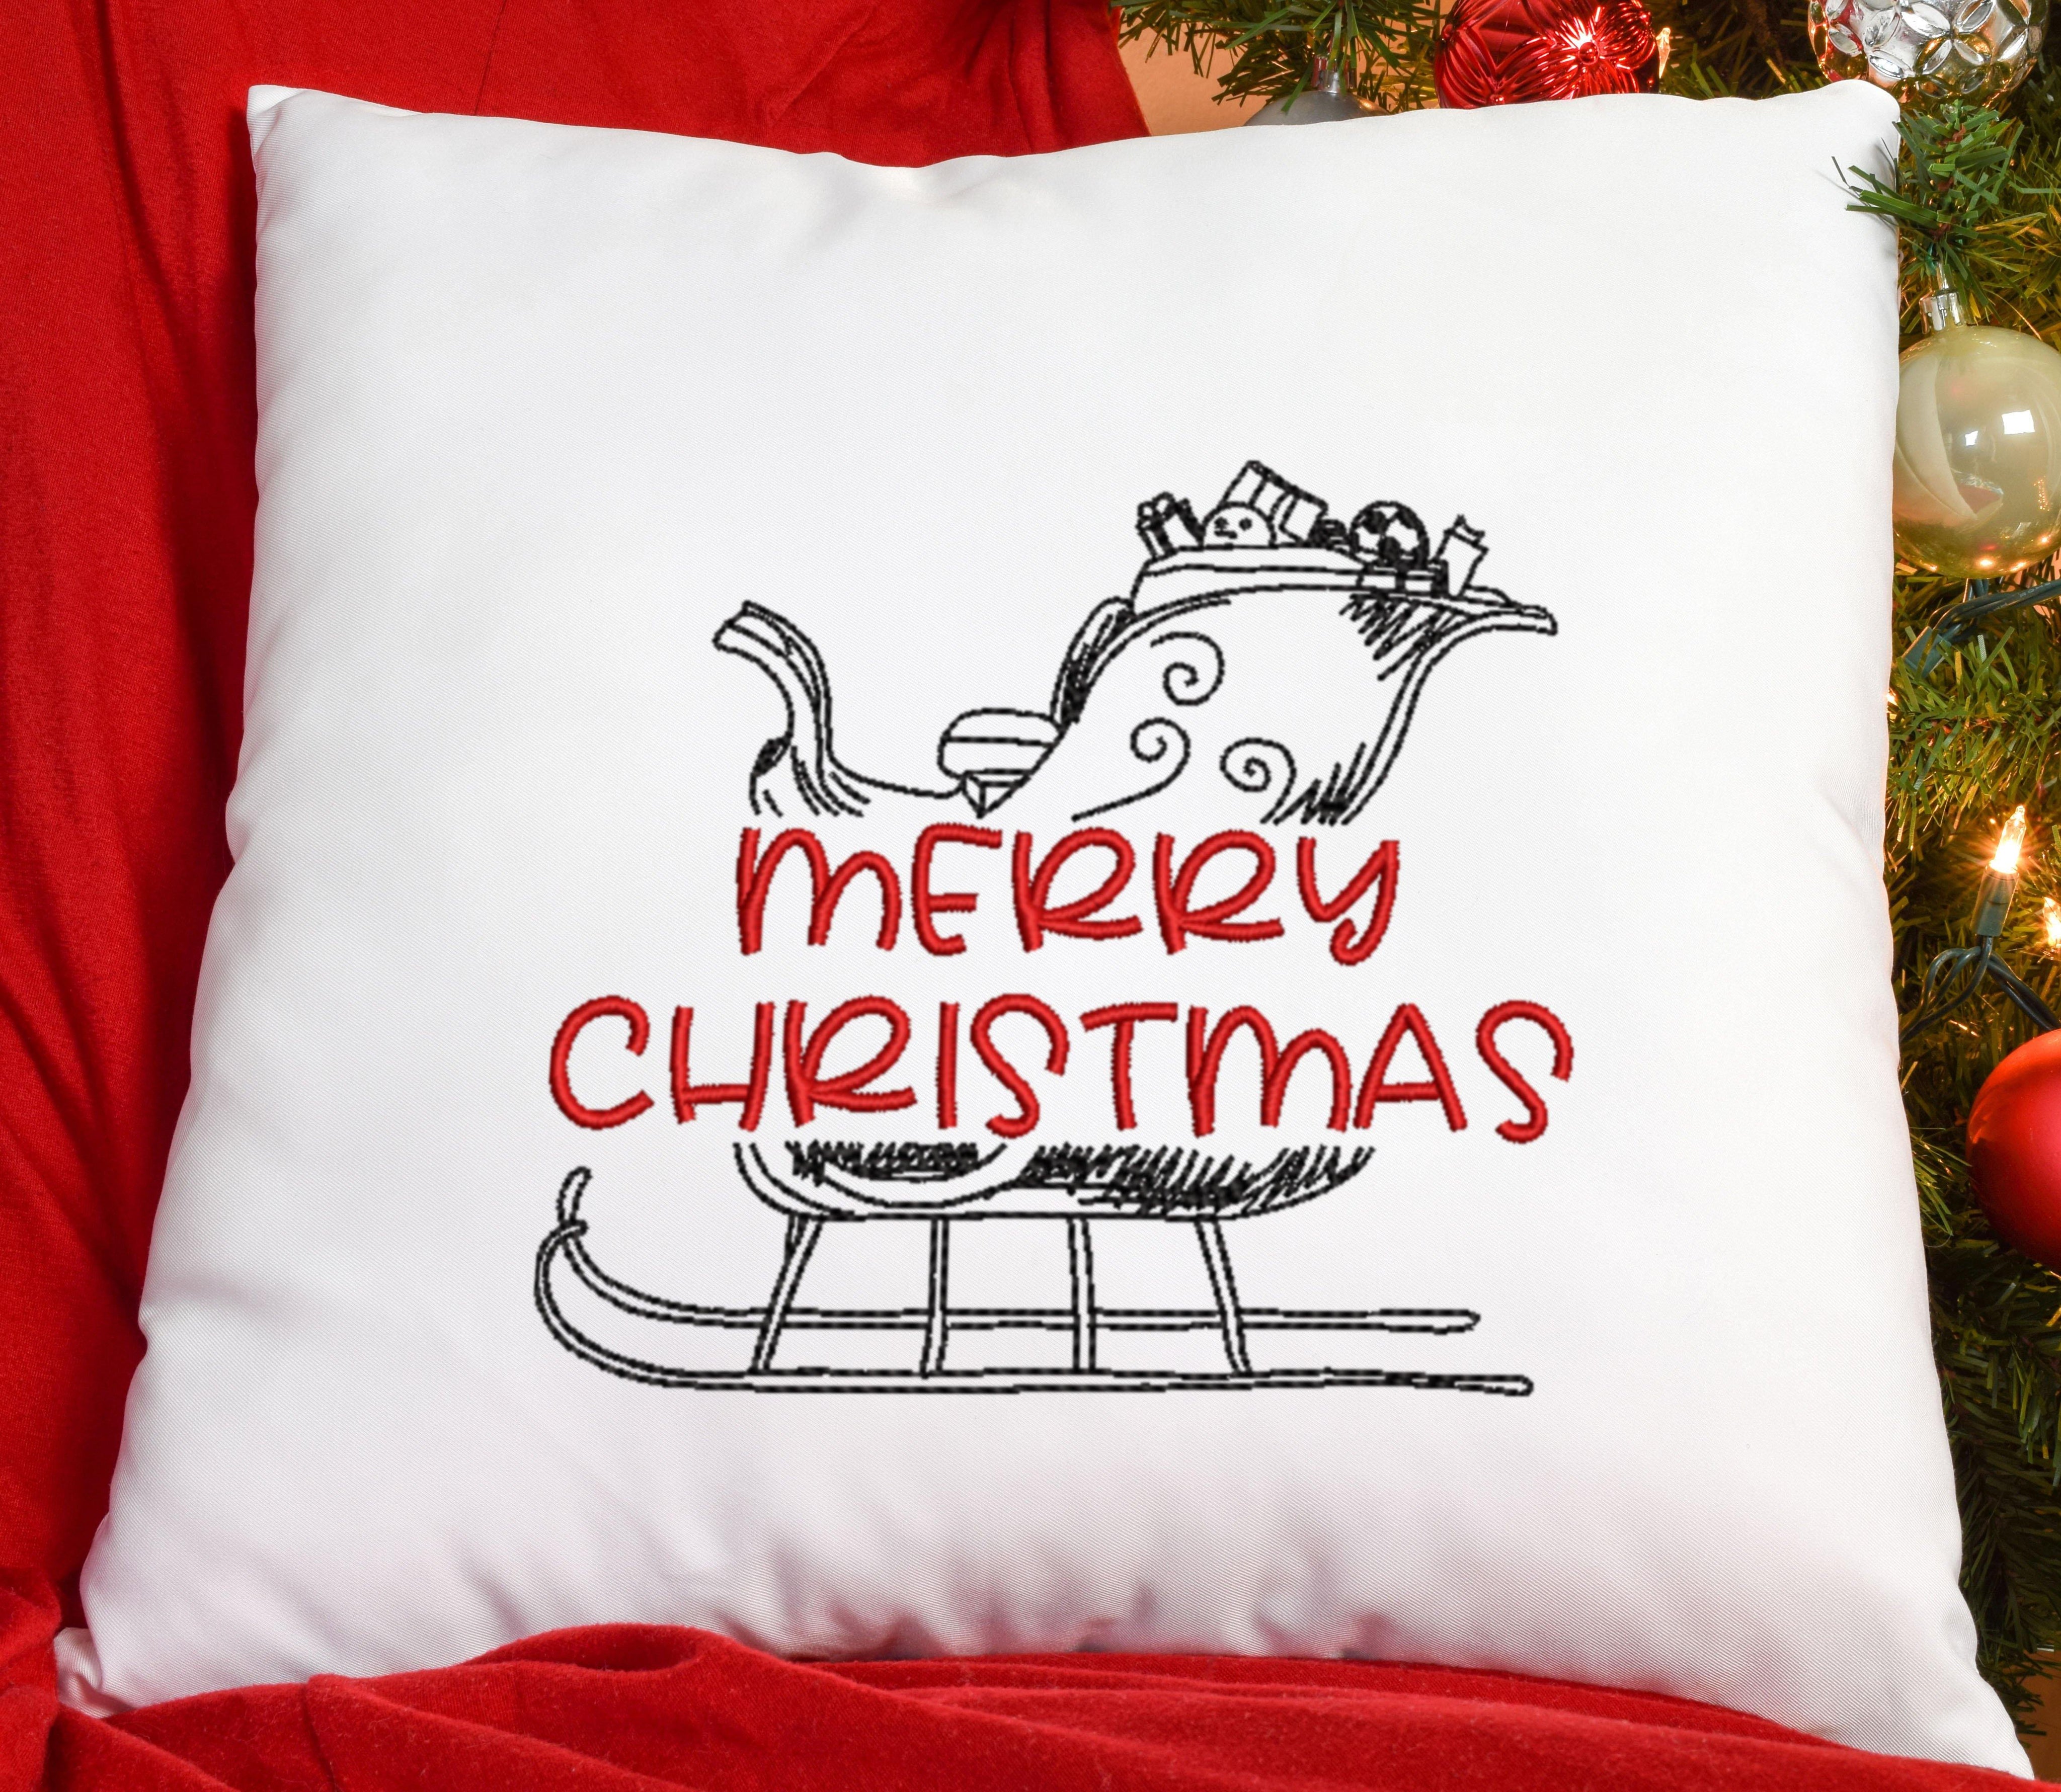 Merry Christmas Sleigh Embroidery Design - Oh My Crafty Supplies Inc.